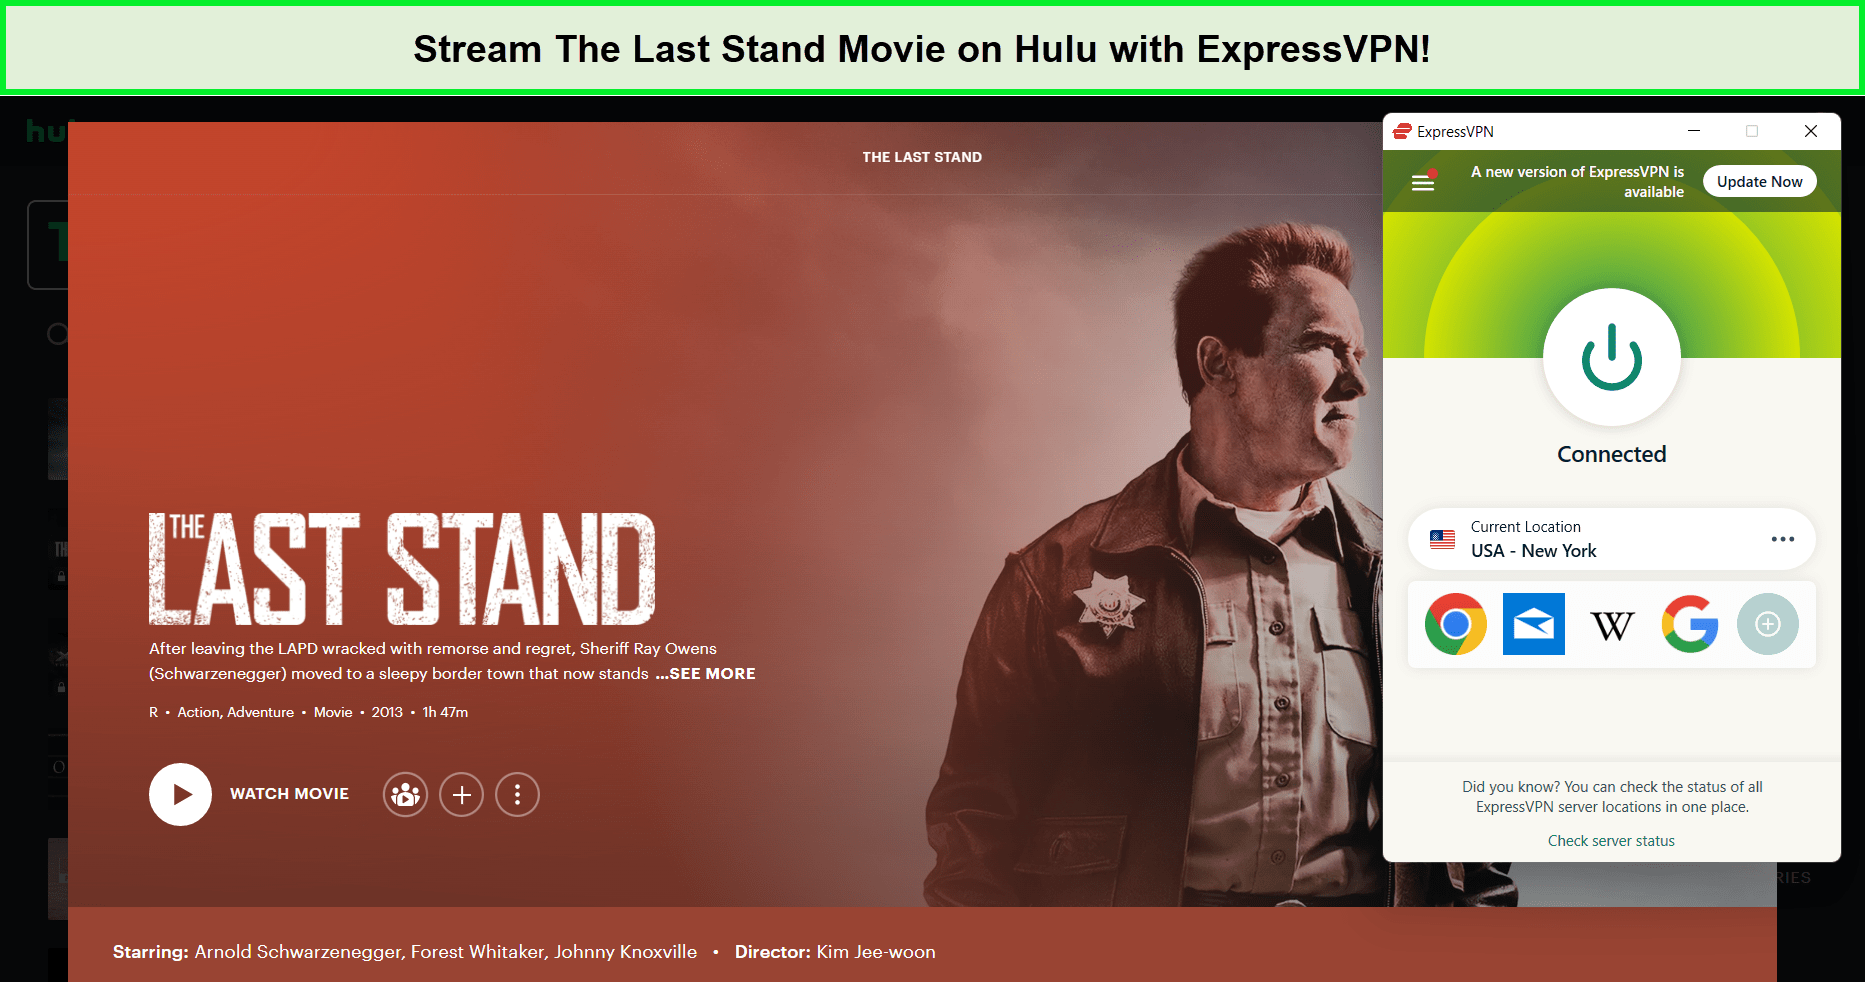 With-ExpressVPN-Watch-The-Last-Stand-Movie-on-Hulu-in-Spain